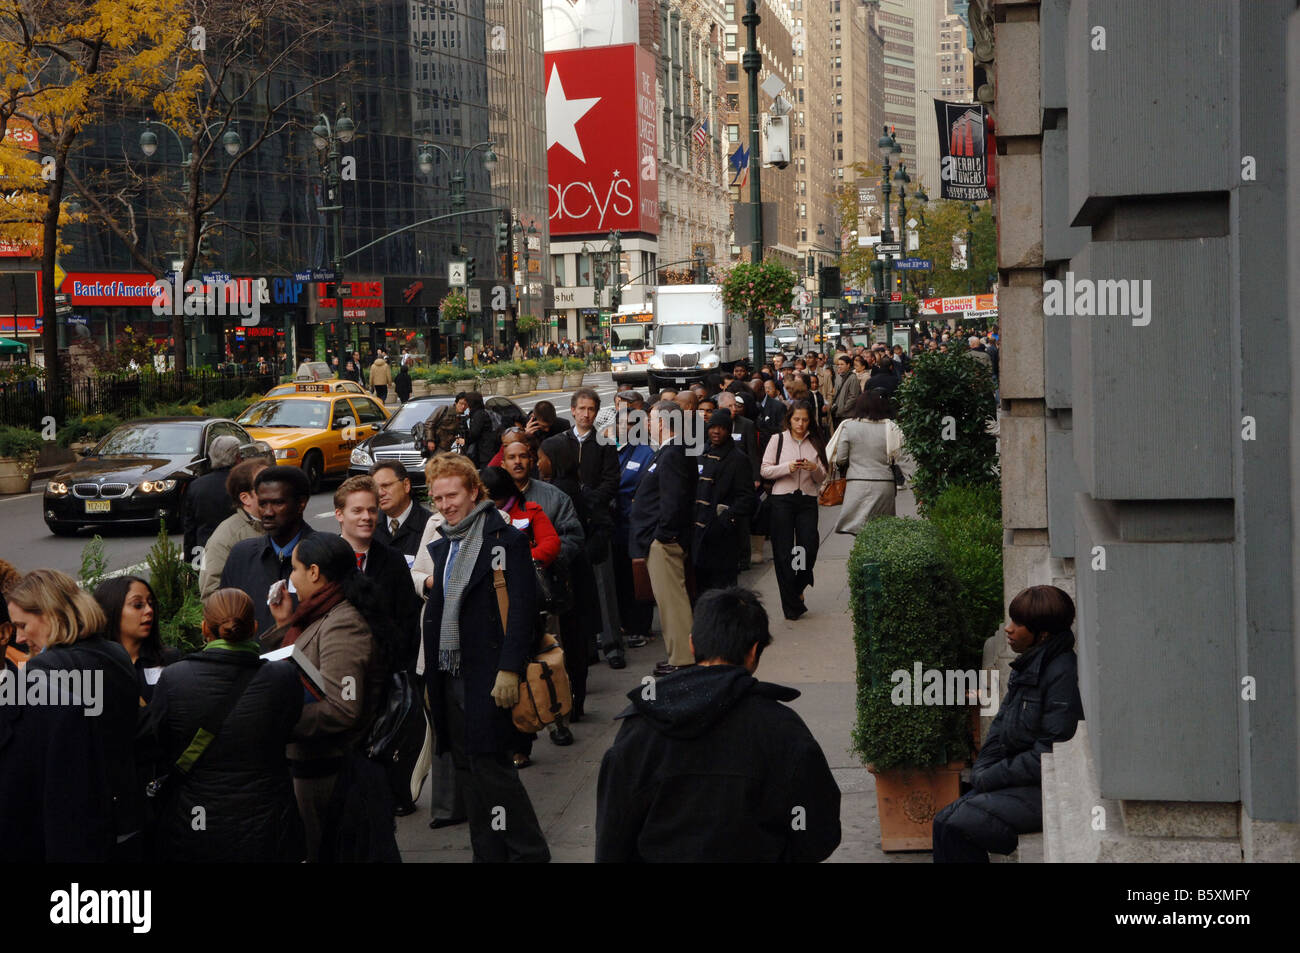 Hundreds of people line up in New York at a job fair sponsored by the website Monster com Stock Photo